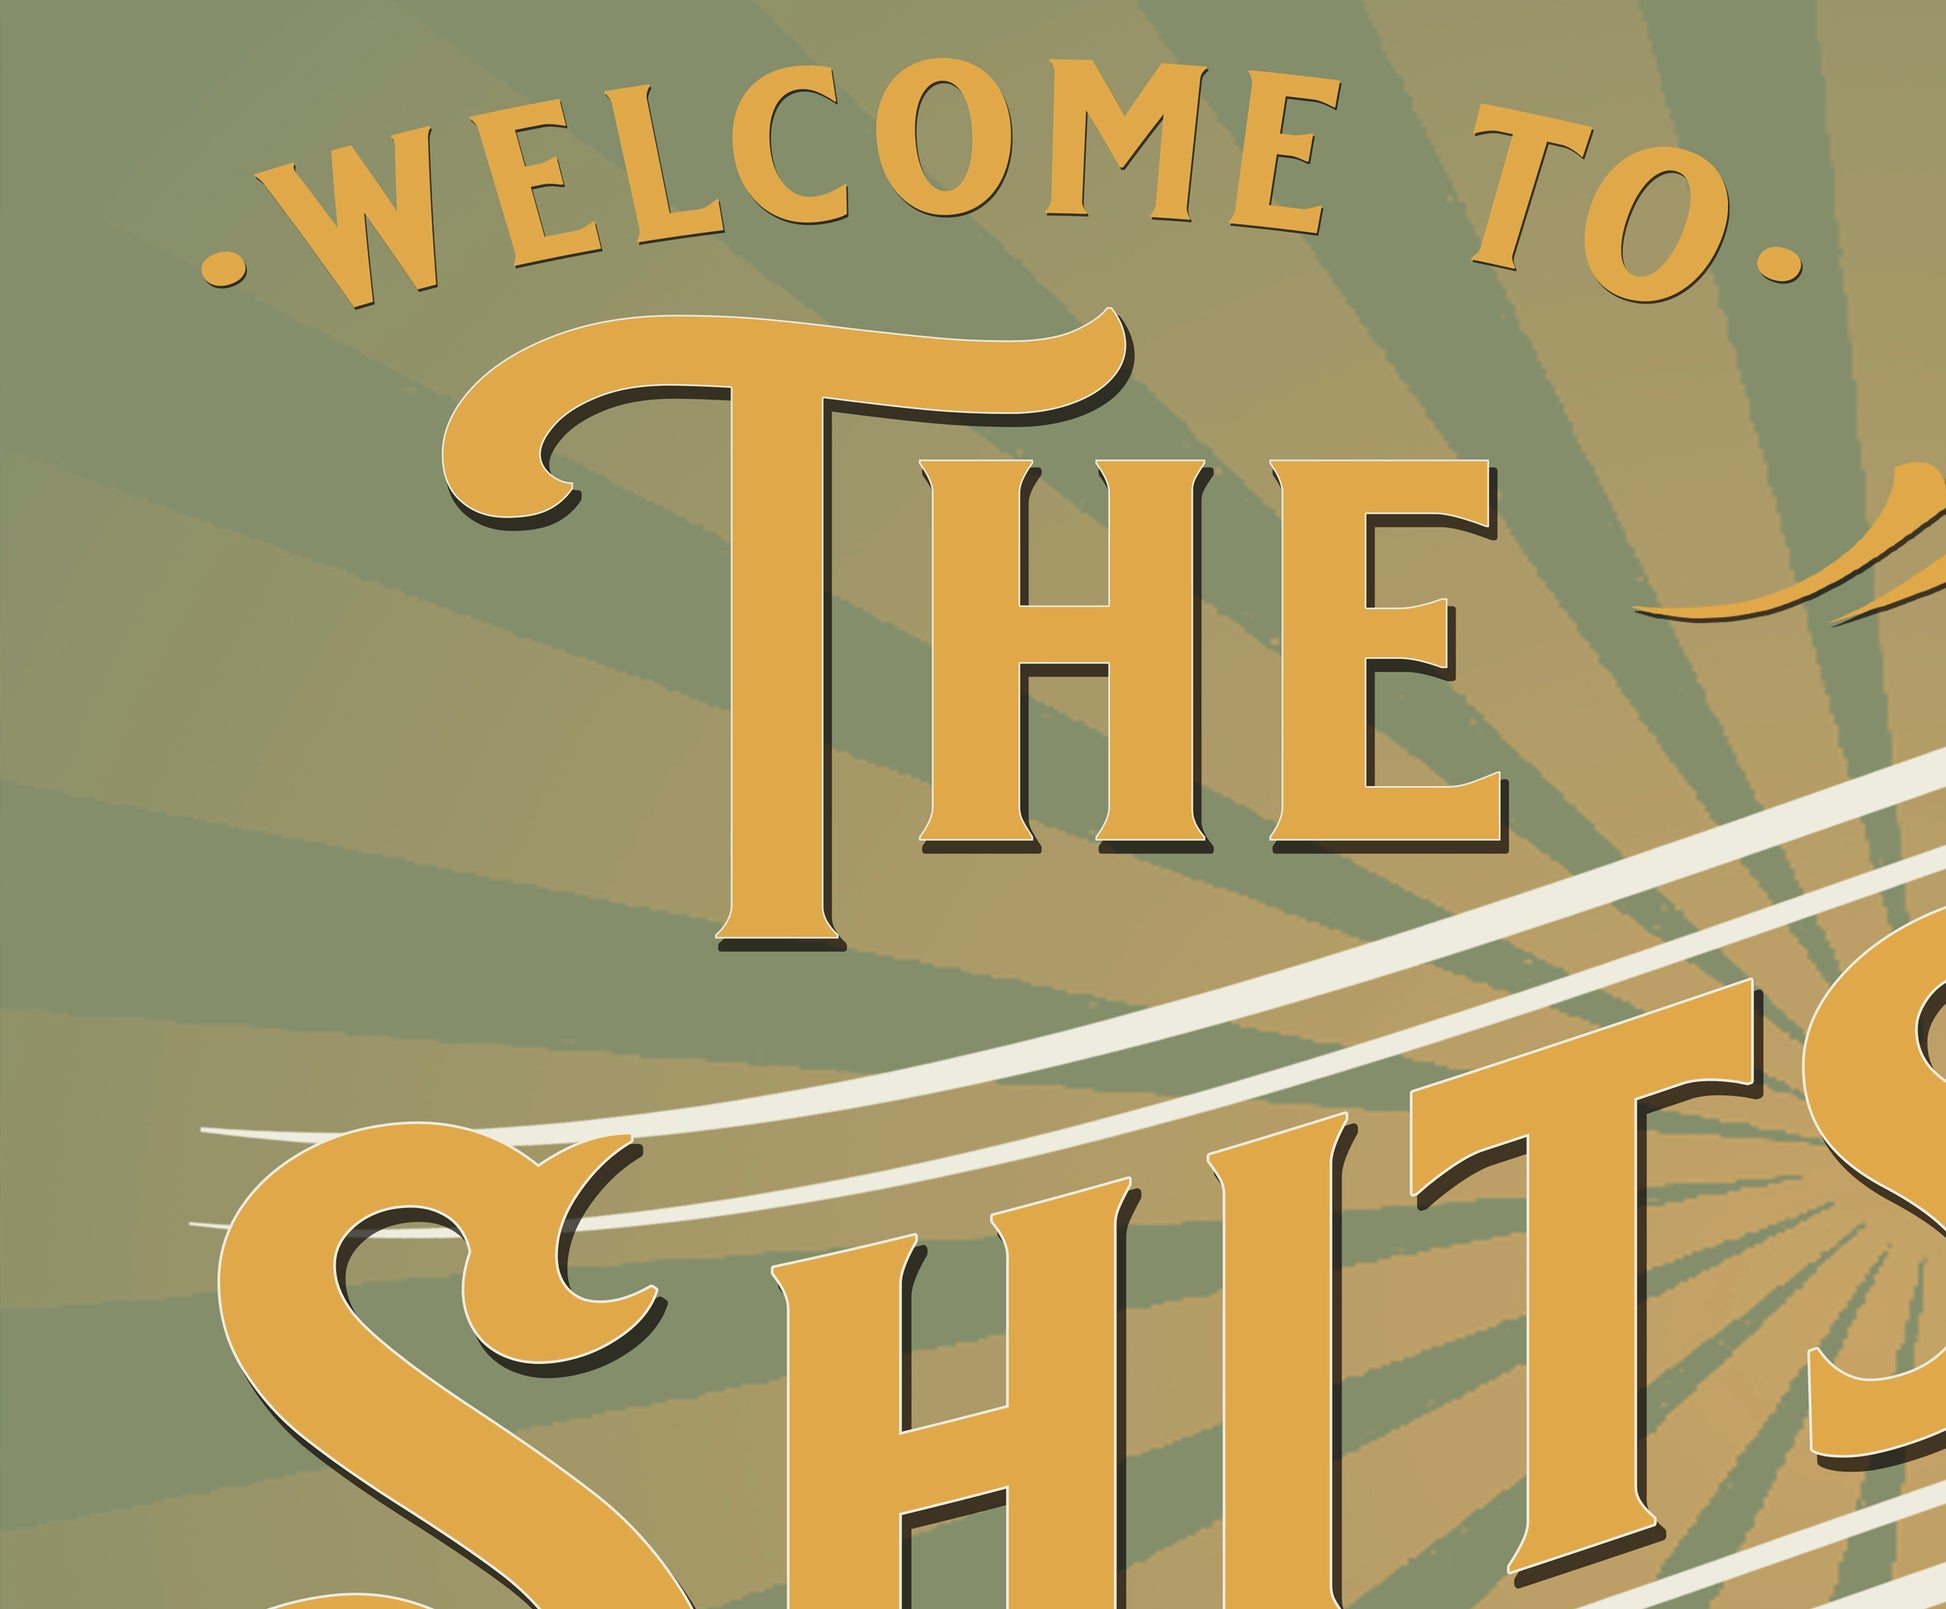 Welcome to the Shitshow Classic Vintage Art Print Poster Close 1